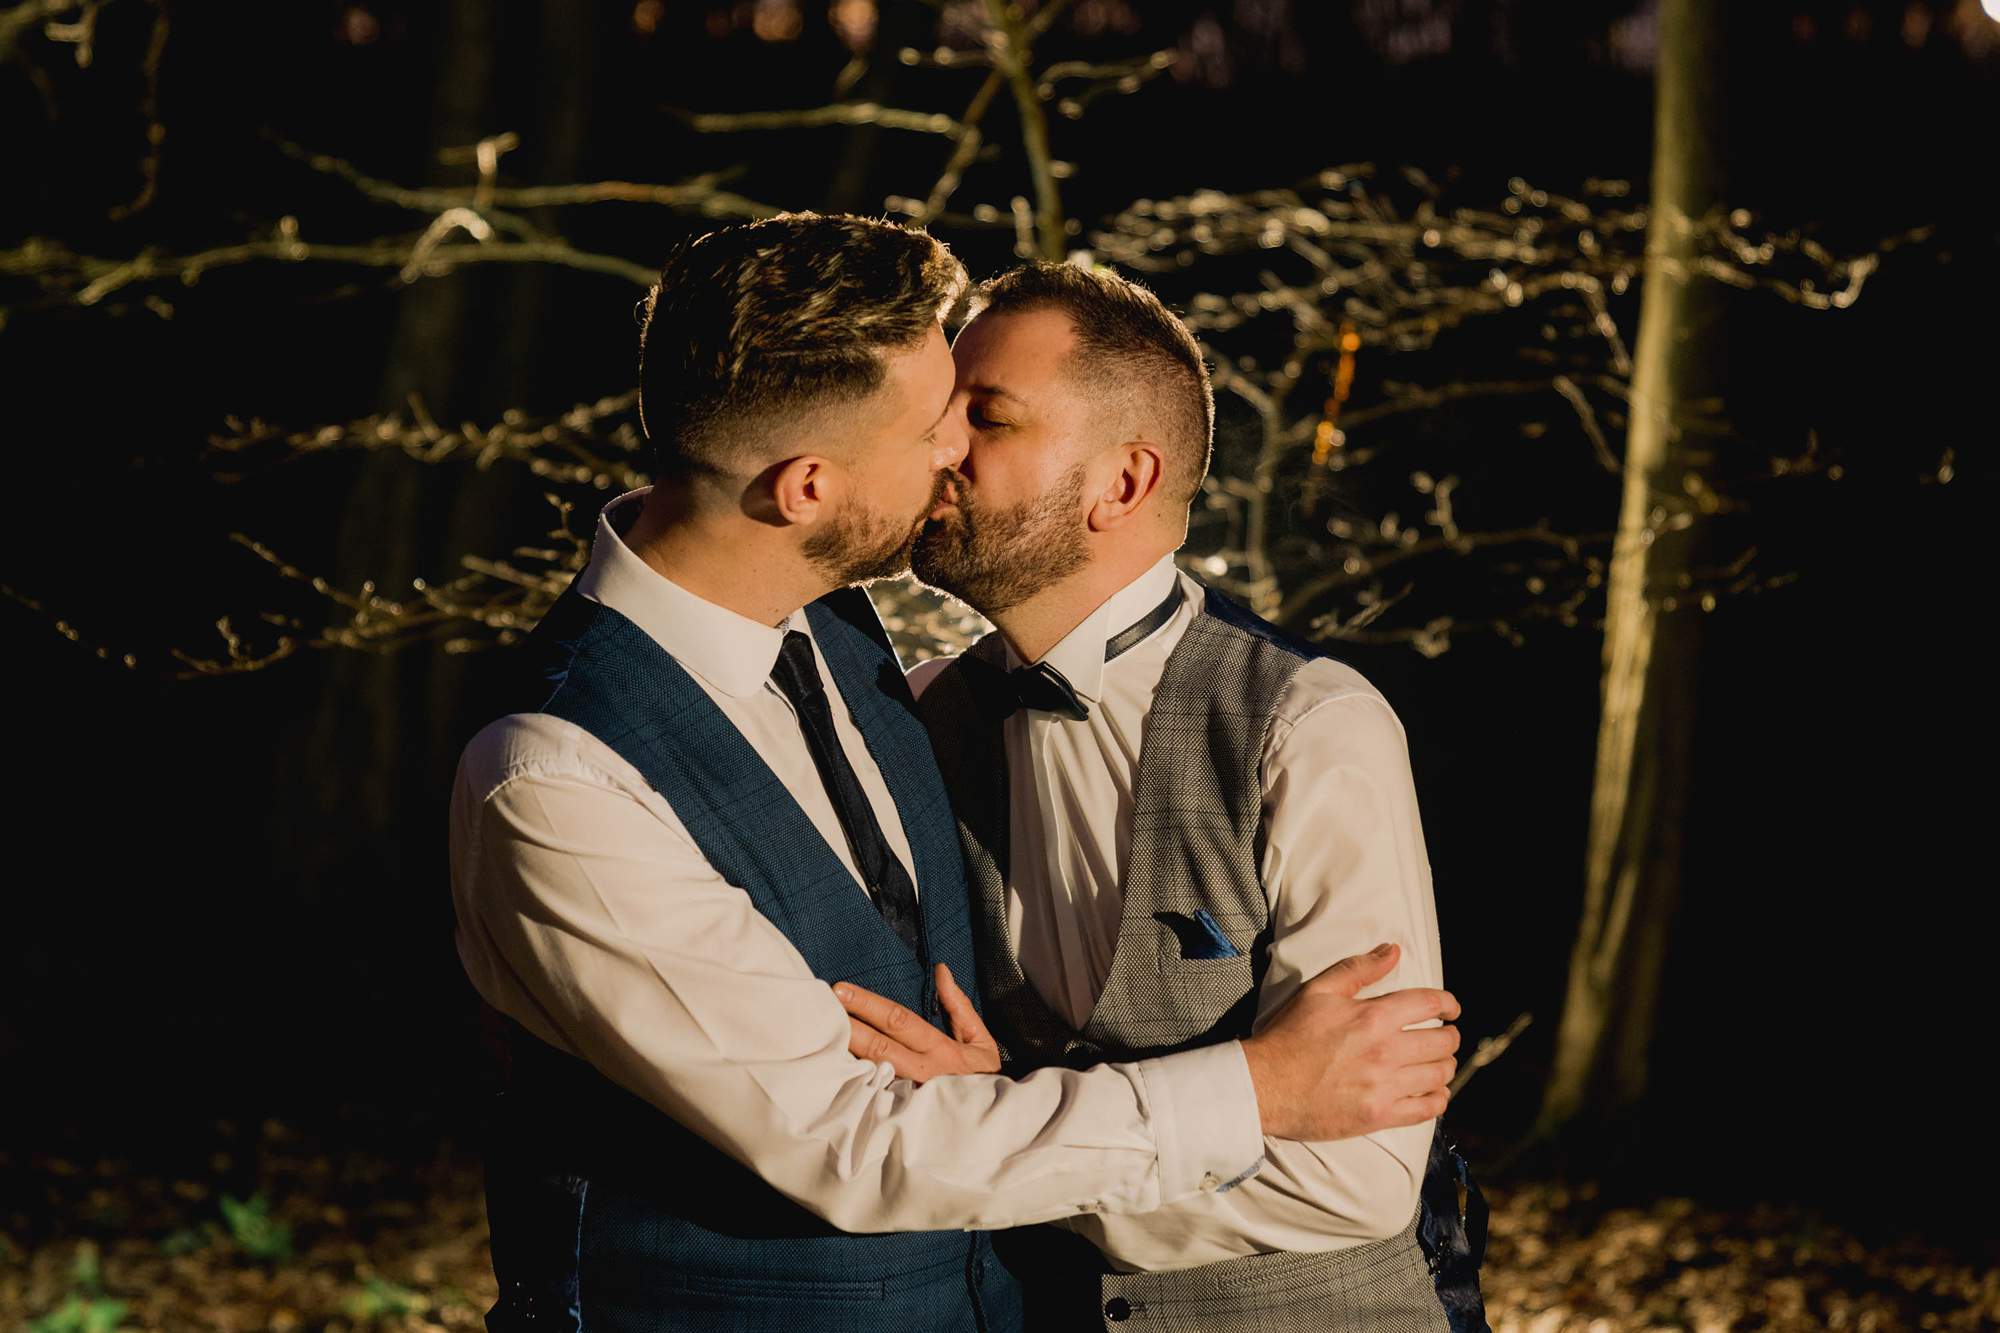 Two grooms kiss on their wedding day at Wickwoods.